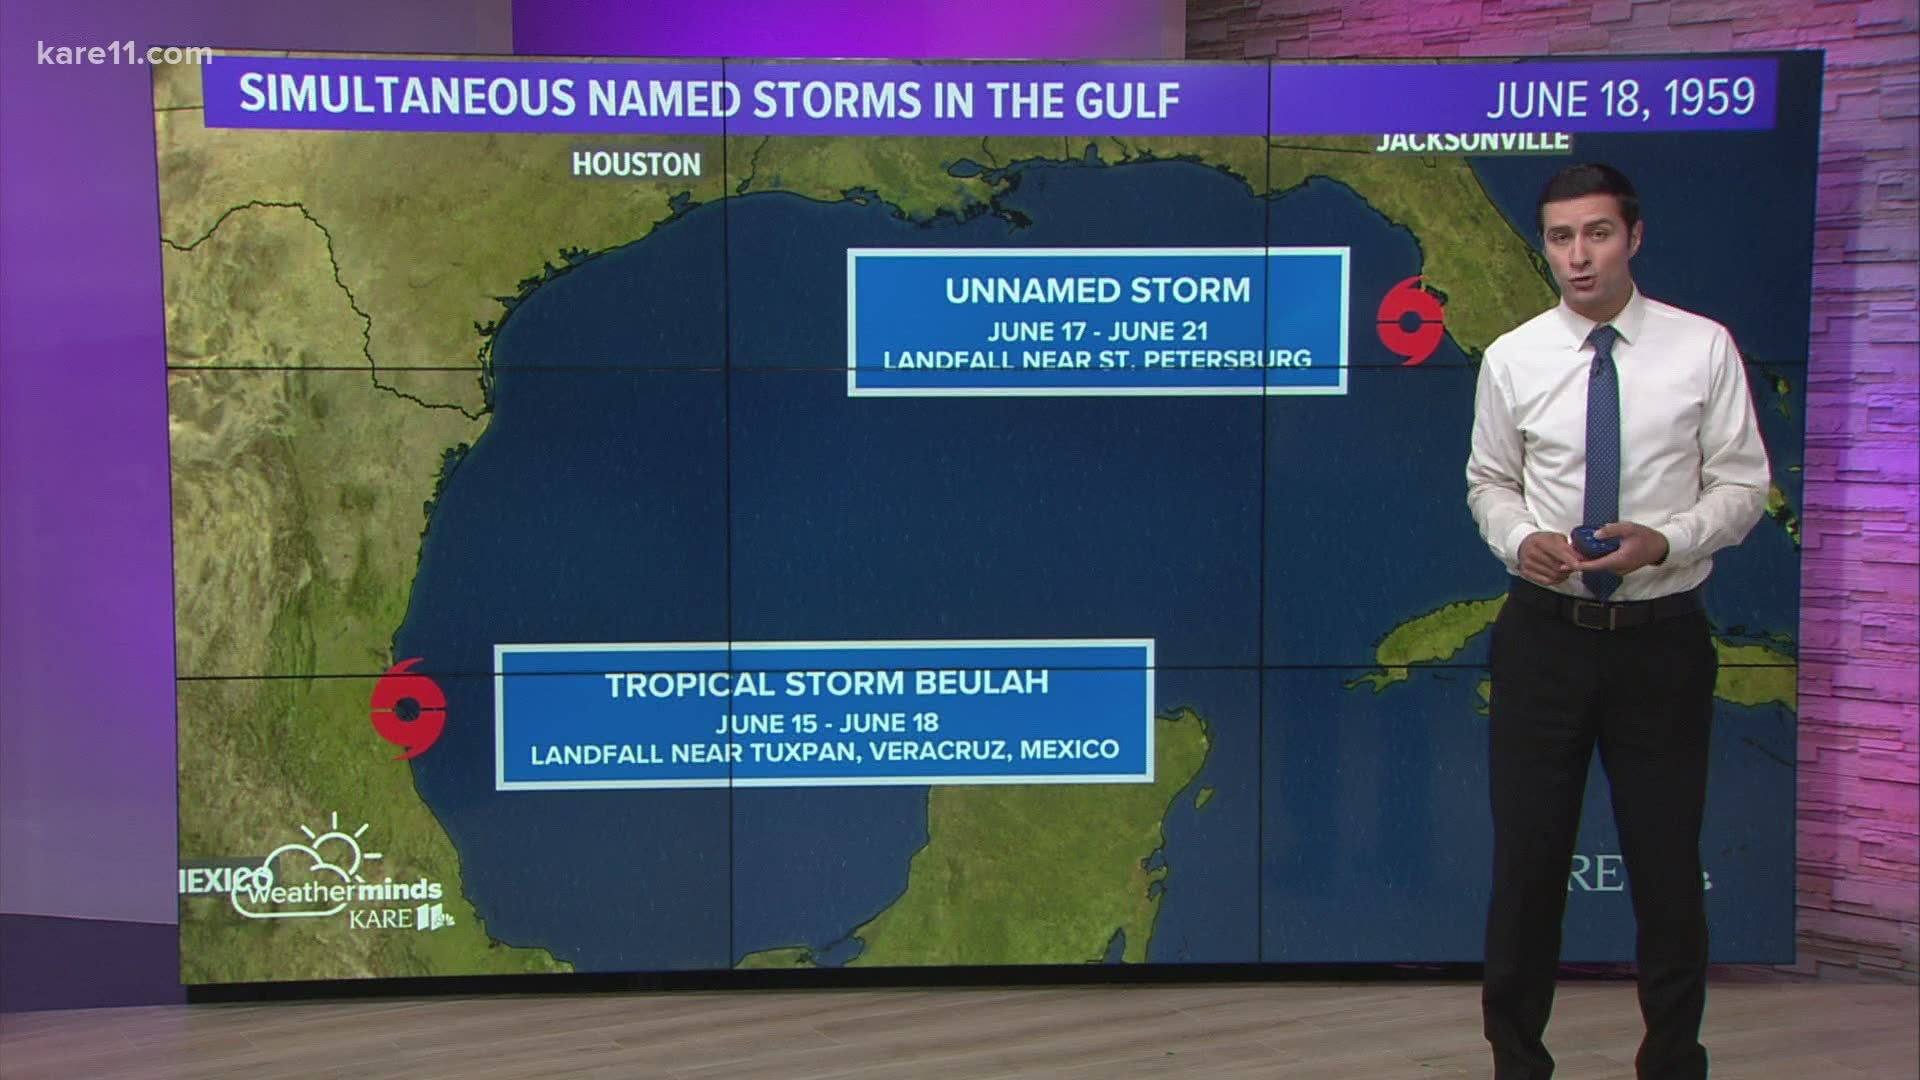 Ben tells us how rare it is to have two "name storms" at the same time